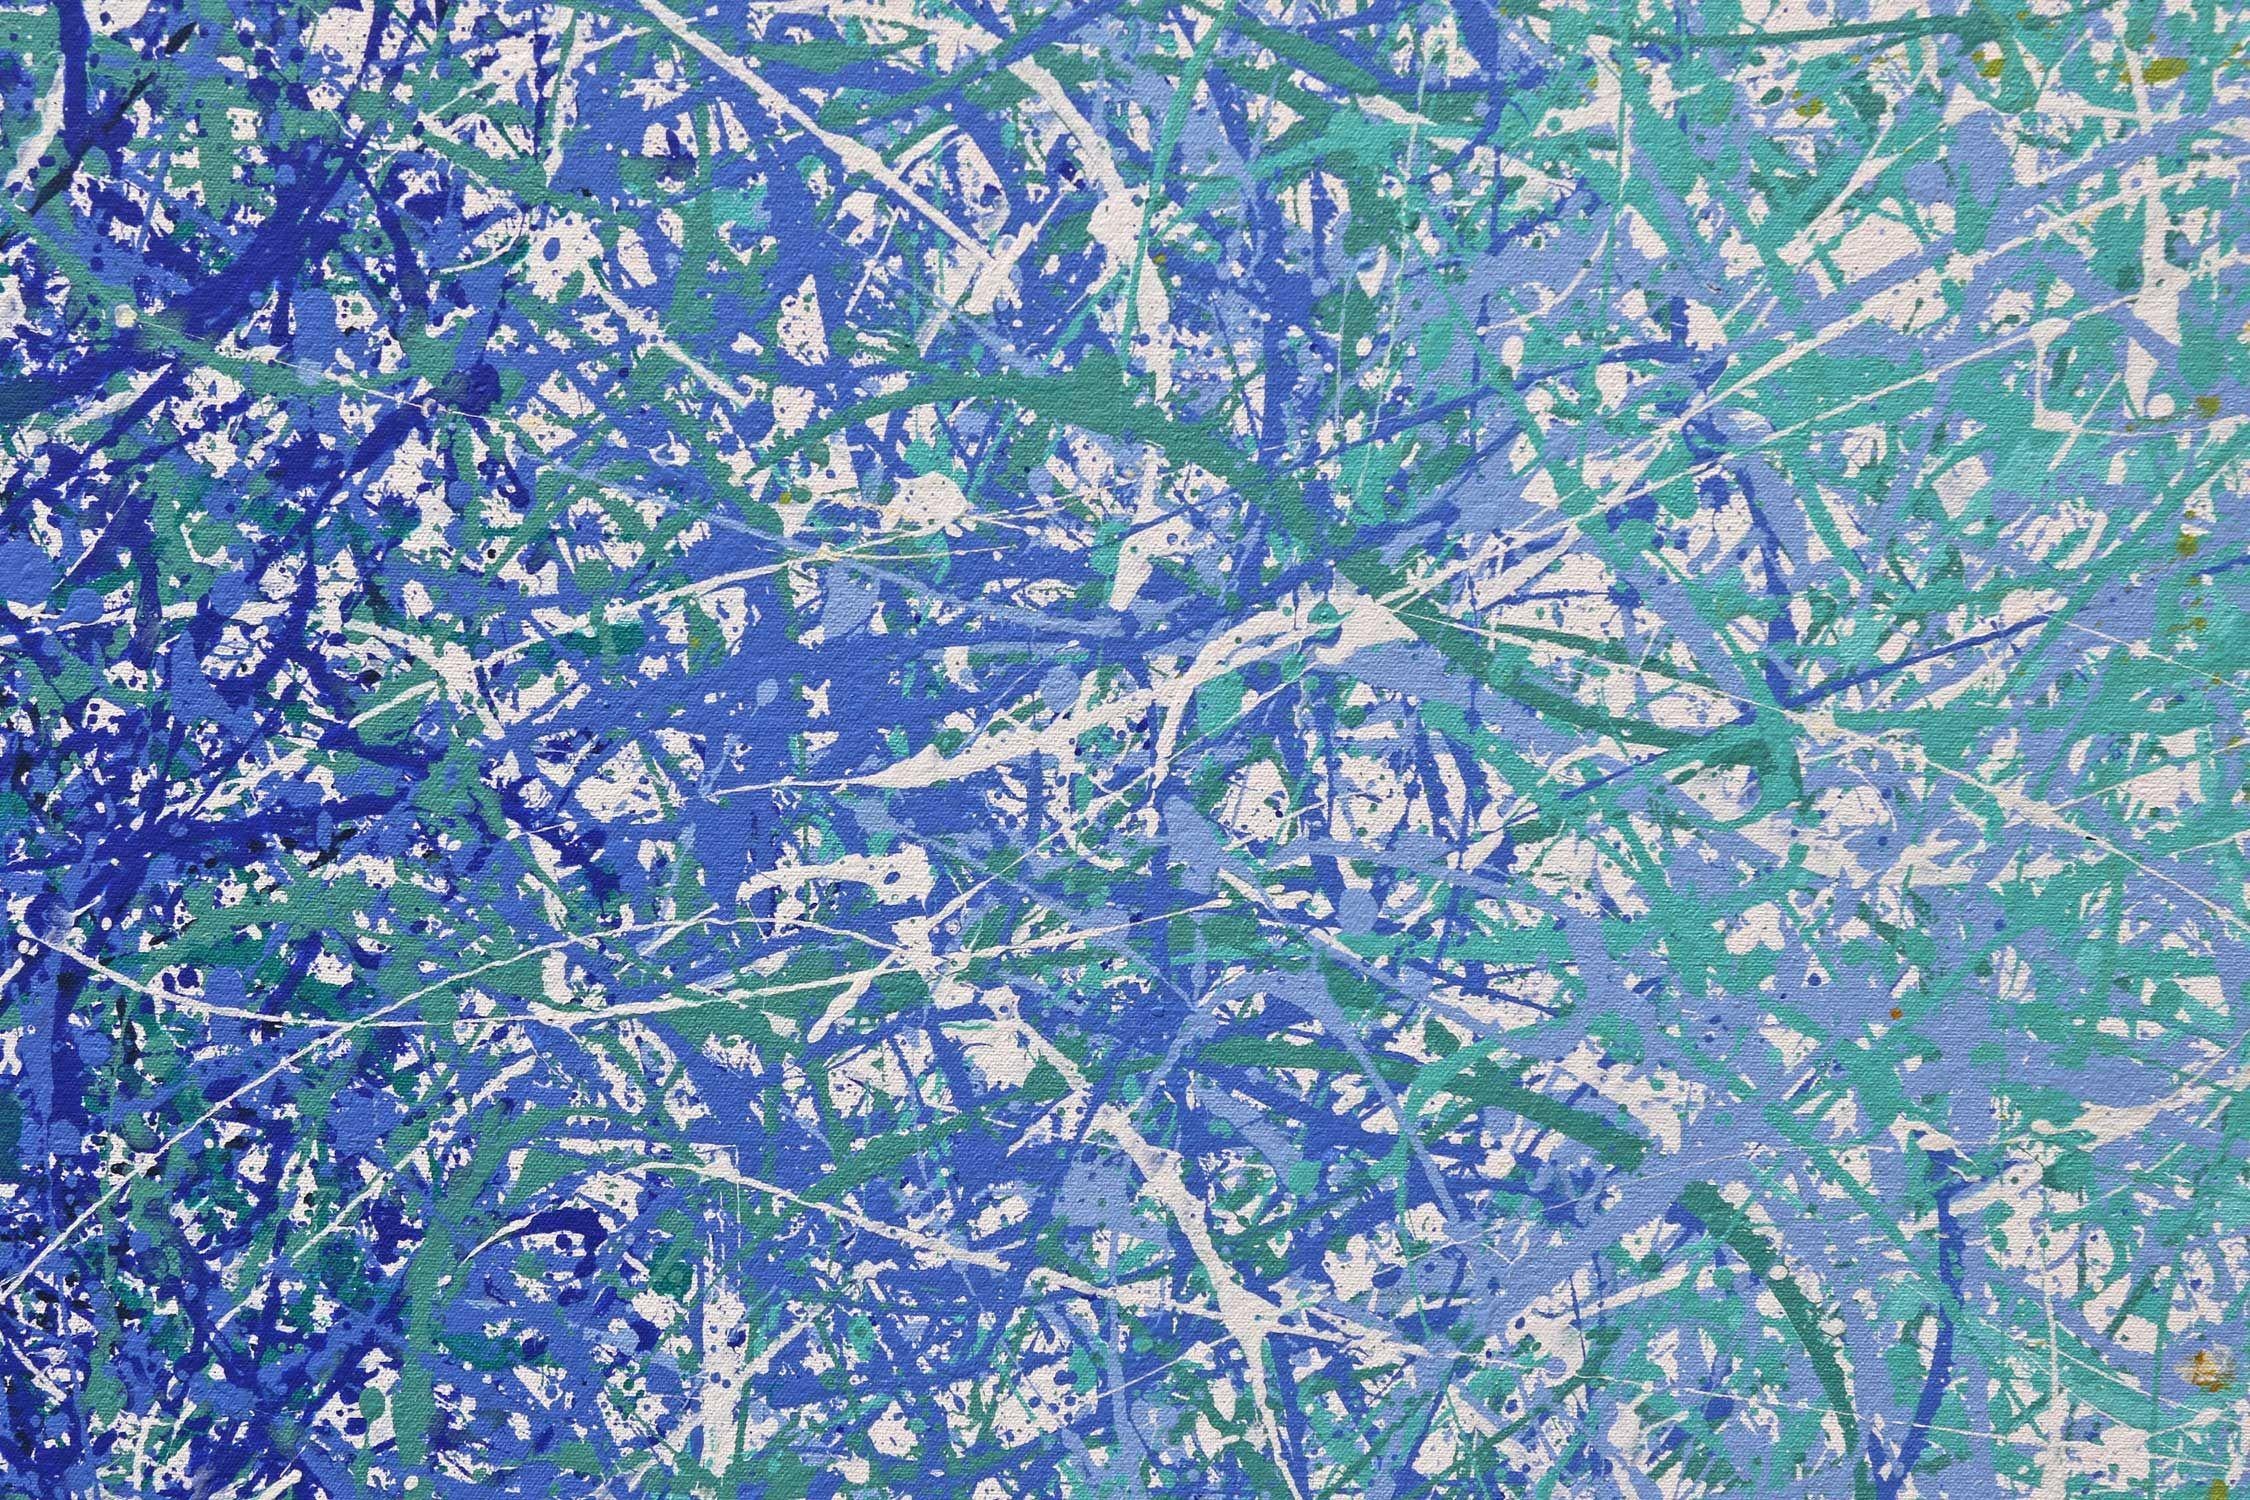 A large modern abstract painting in the style of Jackson Pollock. Painted in shades of turquoise and blue. The technique looks random and easy to achieve, however these take quite a bit of planning to create a balance across the whole piece built up